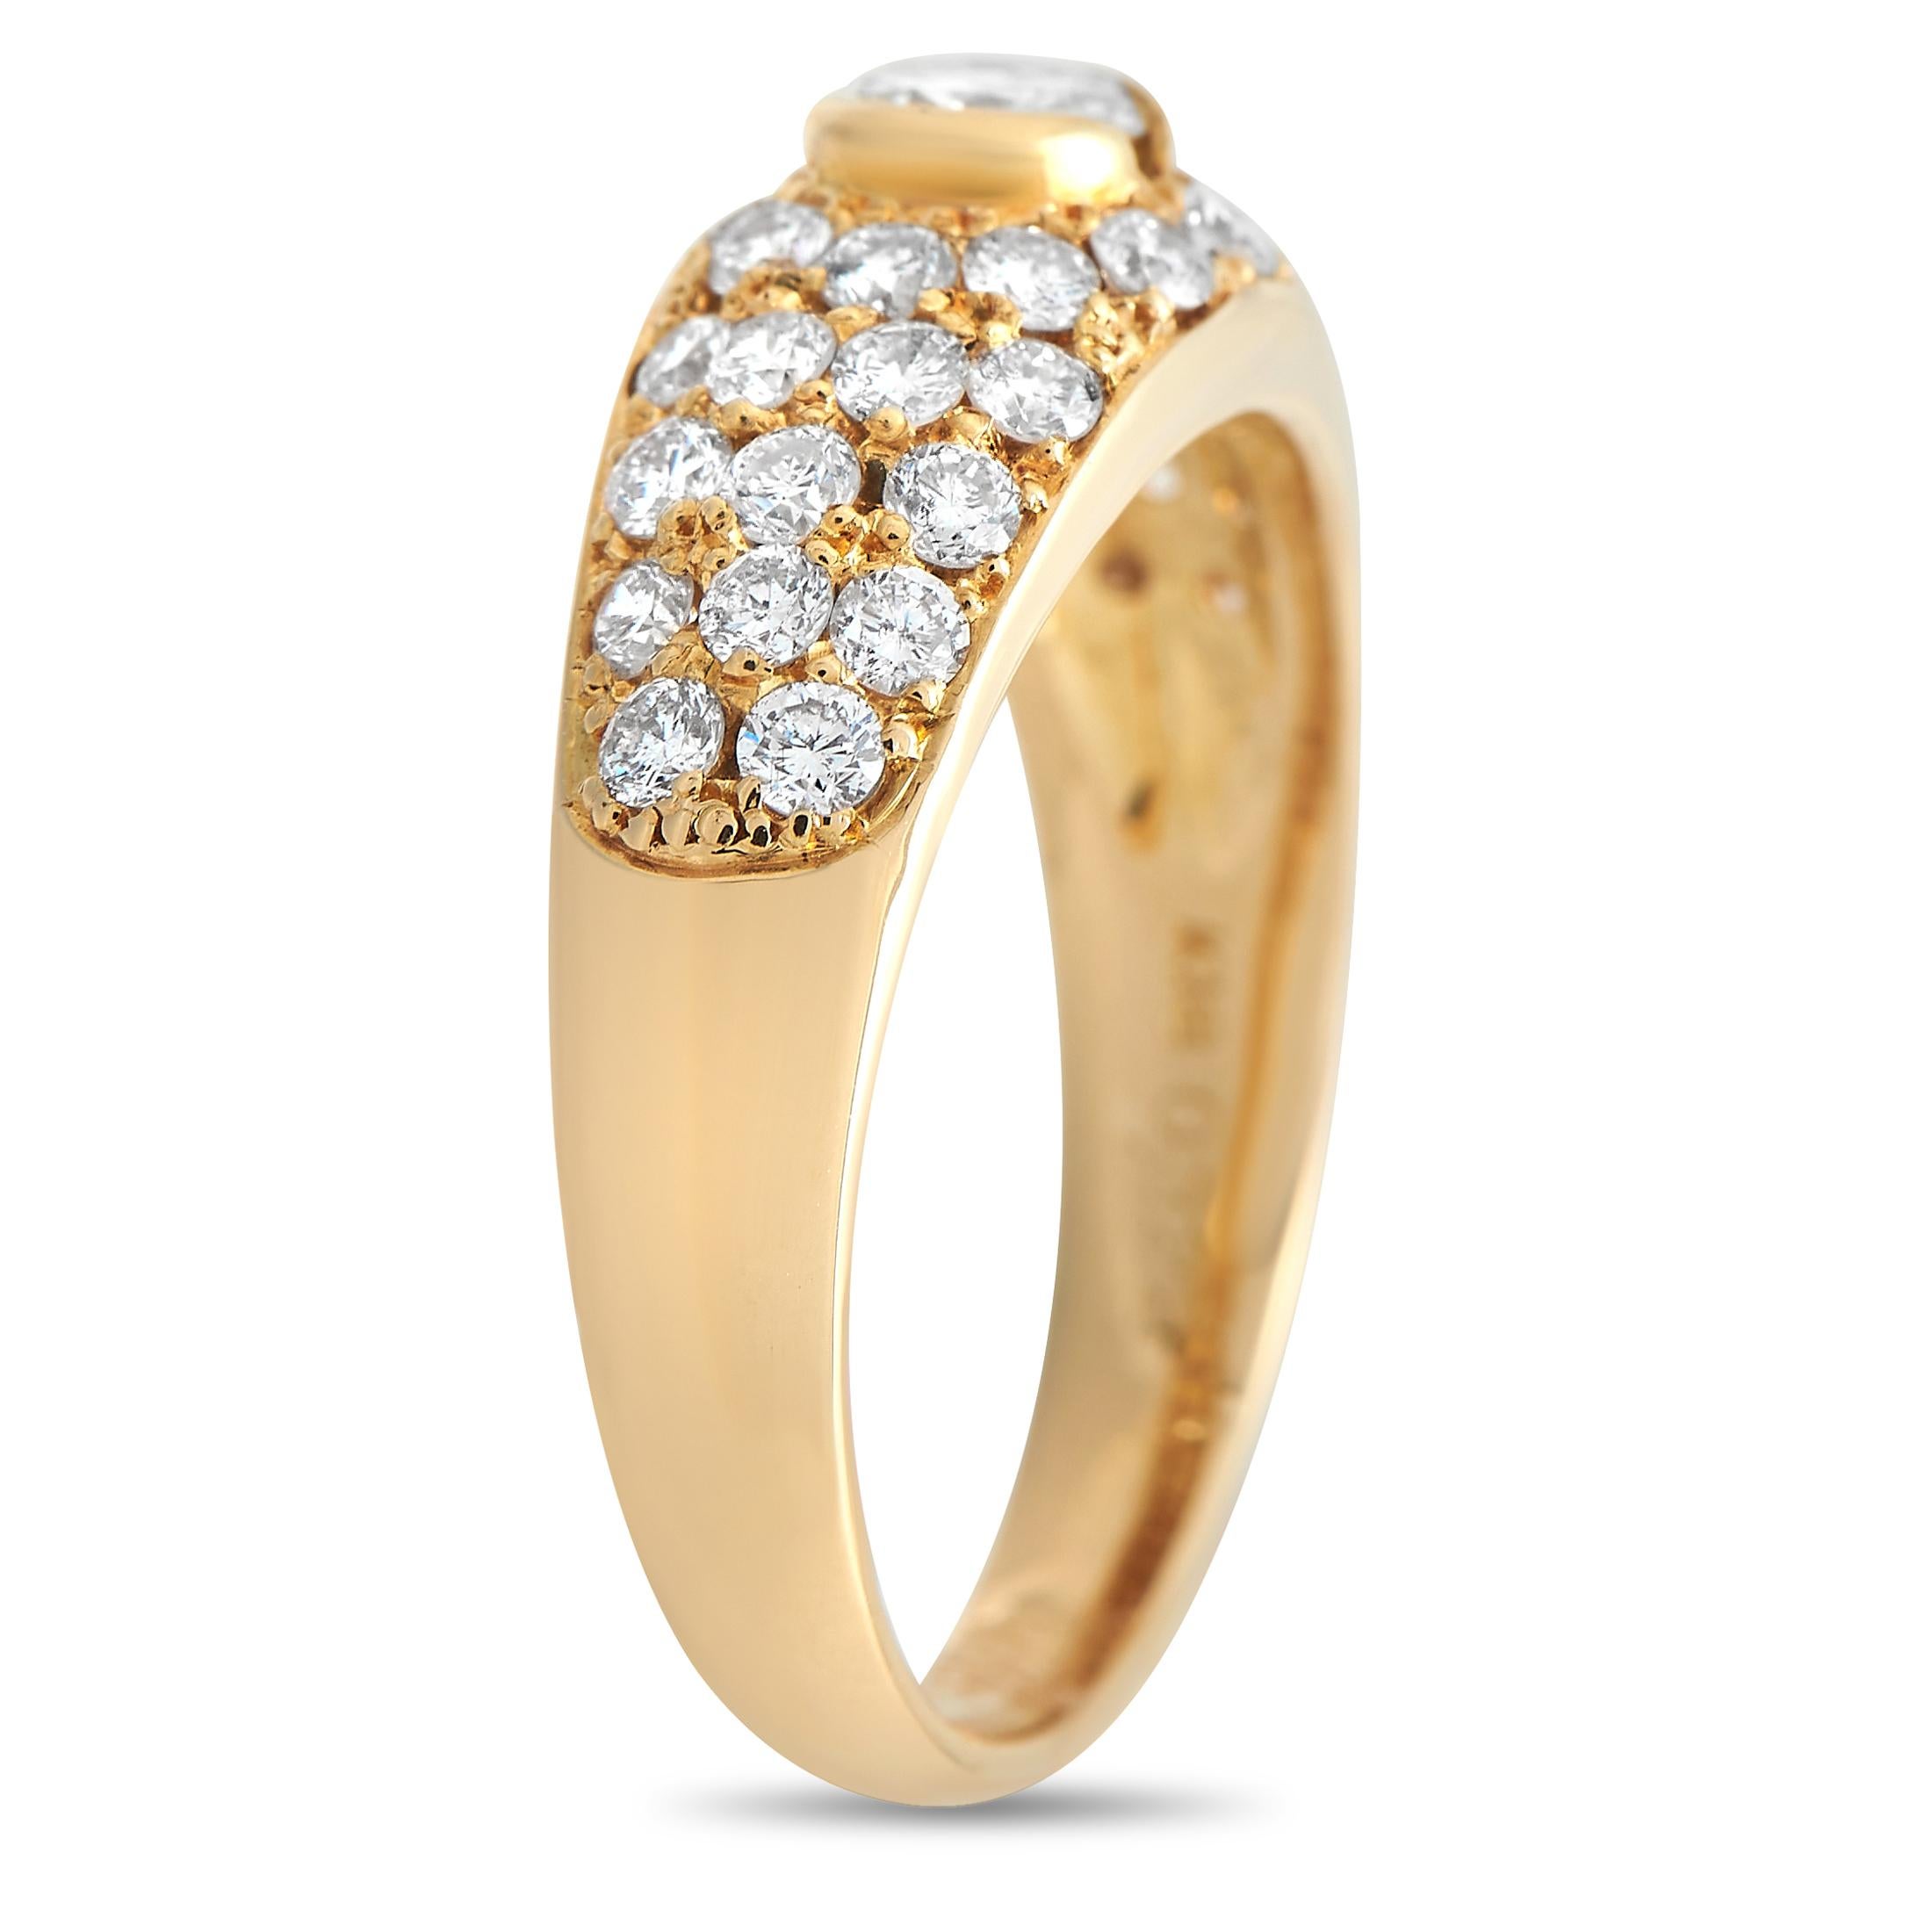 Sparkling diamonds with a total weight of 1.25 carats cover the top of this simple, elegant ring. Crafted from 18K Yellow Gold, the stylish setting features a 3mm wide band and a 5mm top height.\r\nThis jewelry piece is offered in estate condition